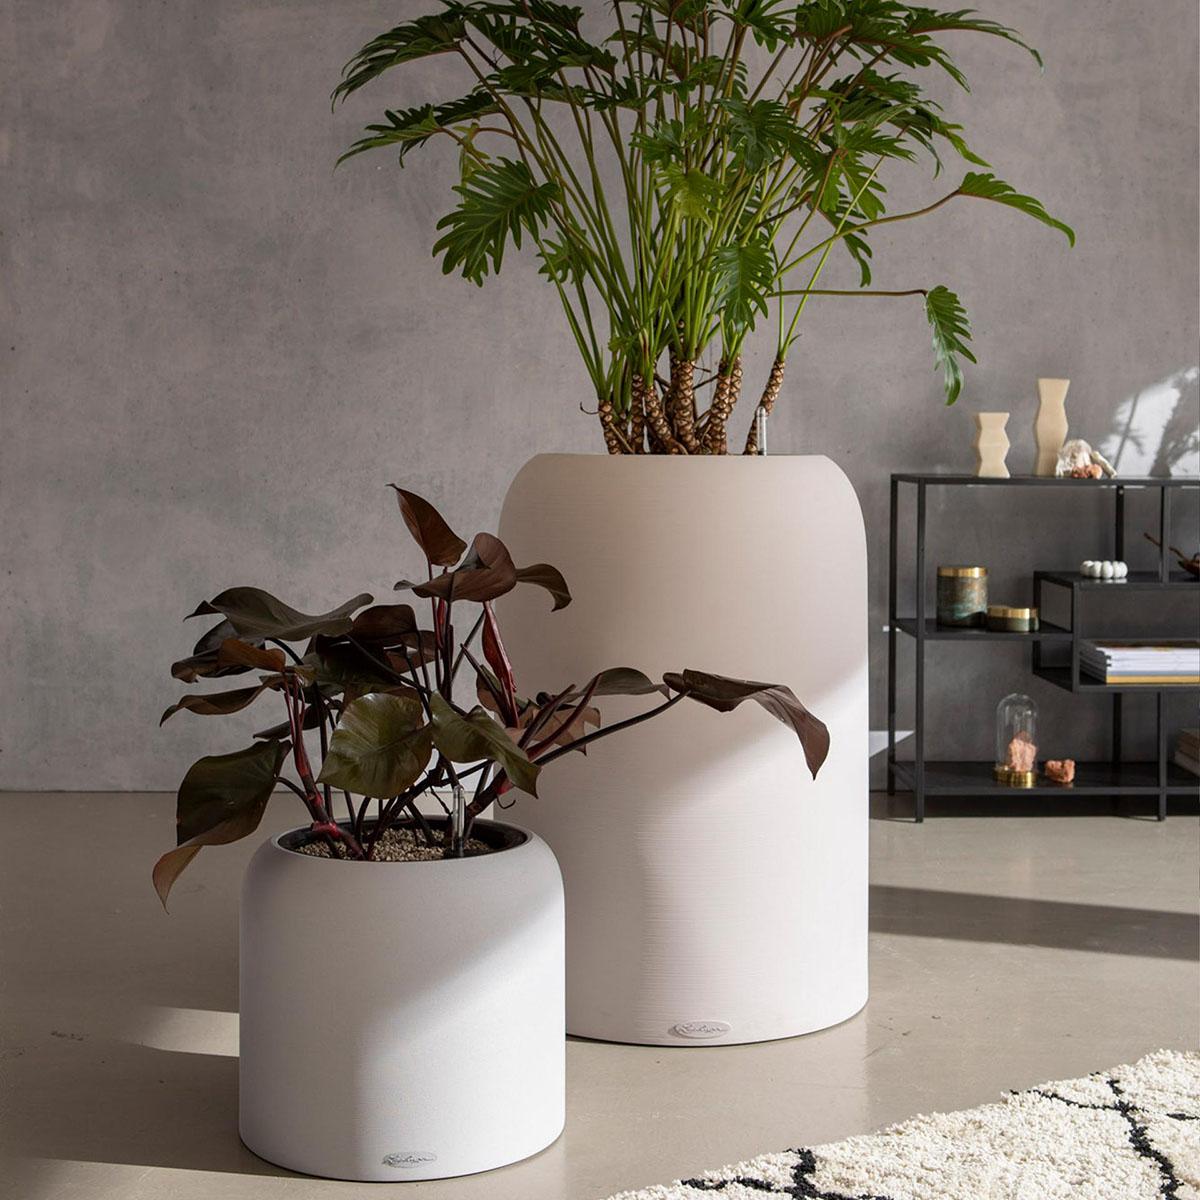 LECHUZA CANTO Stone 40 Low Graphite Black Poly Resin Floor Self-watering Planter with Substrate and Water Level Indicator H40 L40 W40 cm, 29L - citiplants.com